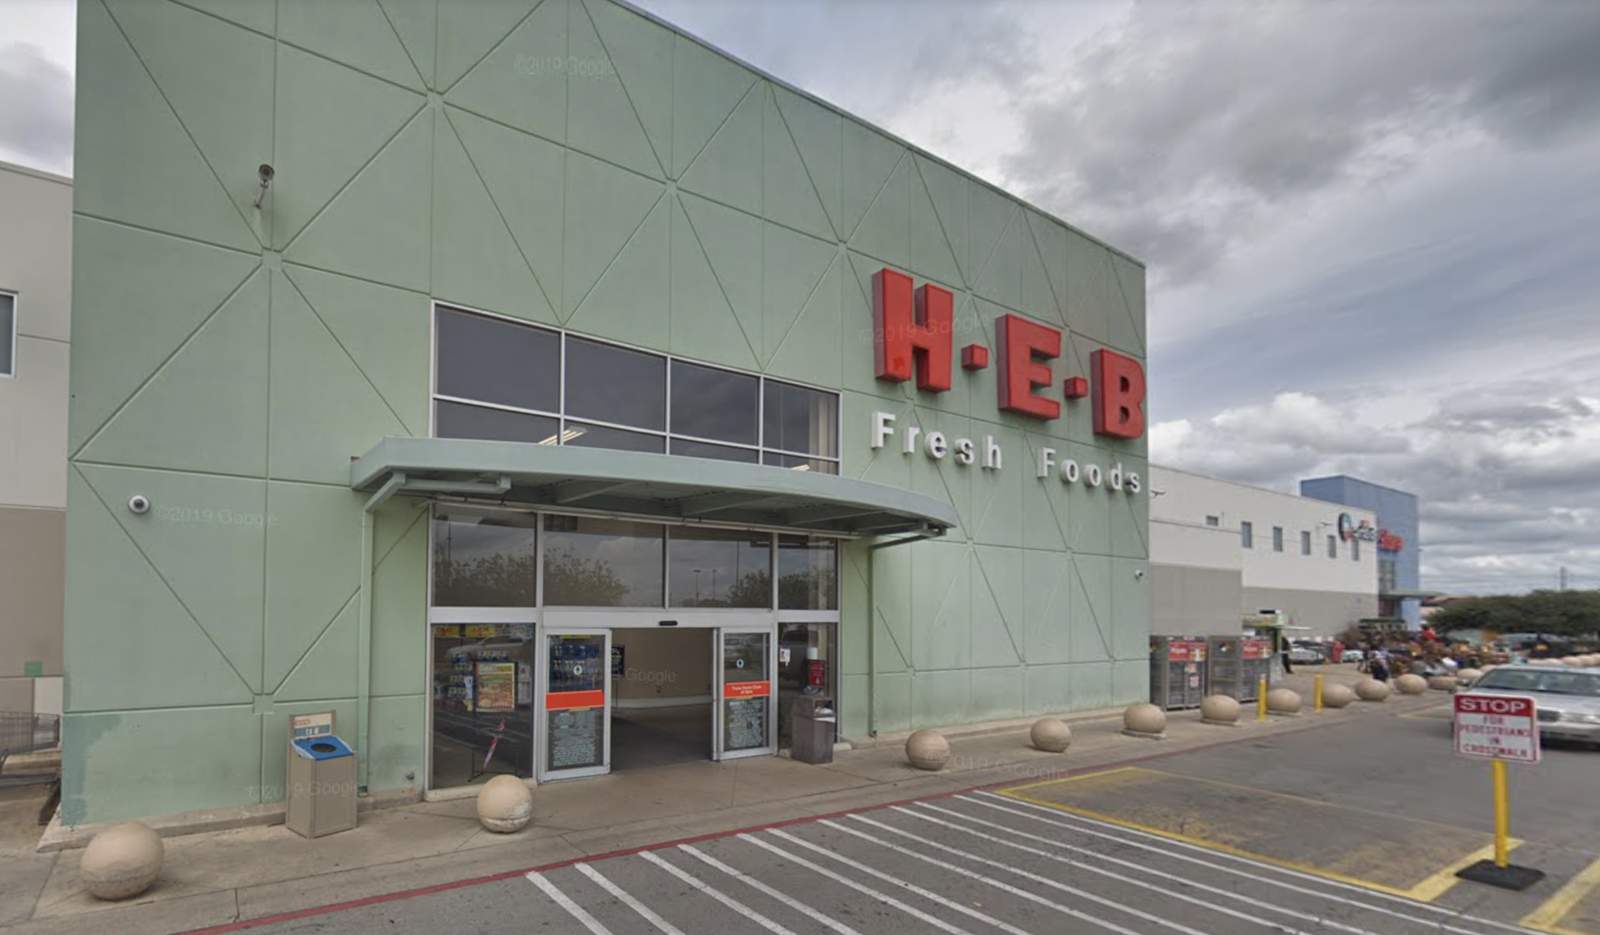 Employee at San Antonio H-E-B tests positive for COVID-19, store officials say